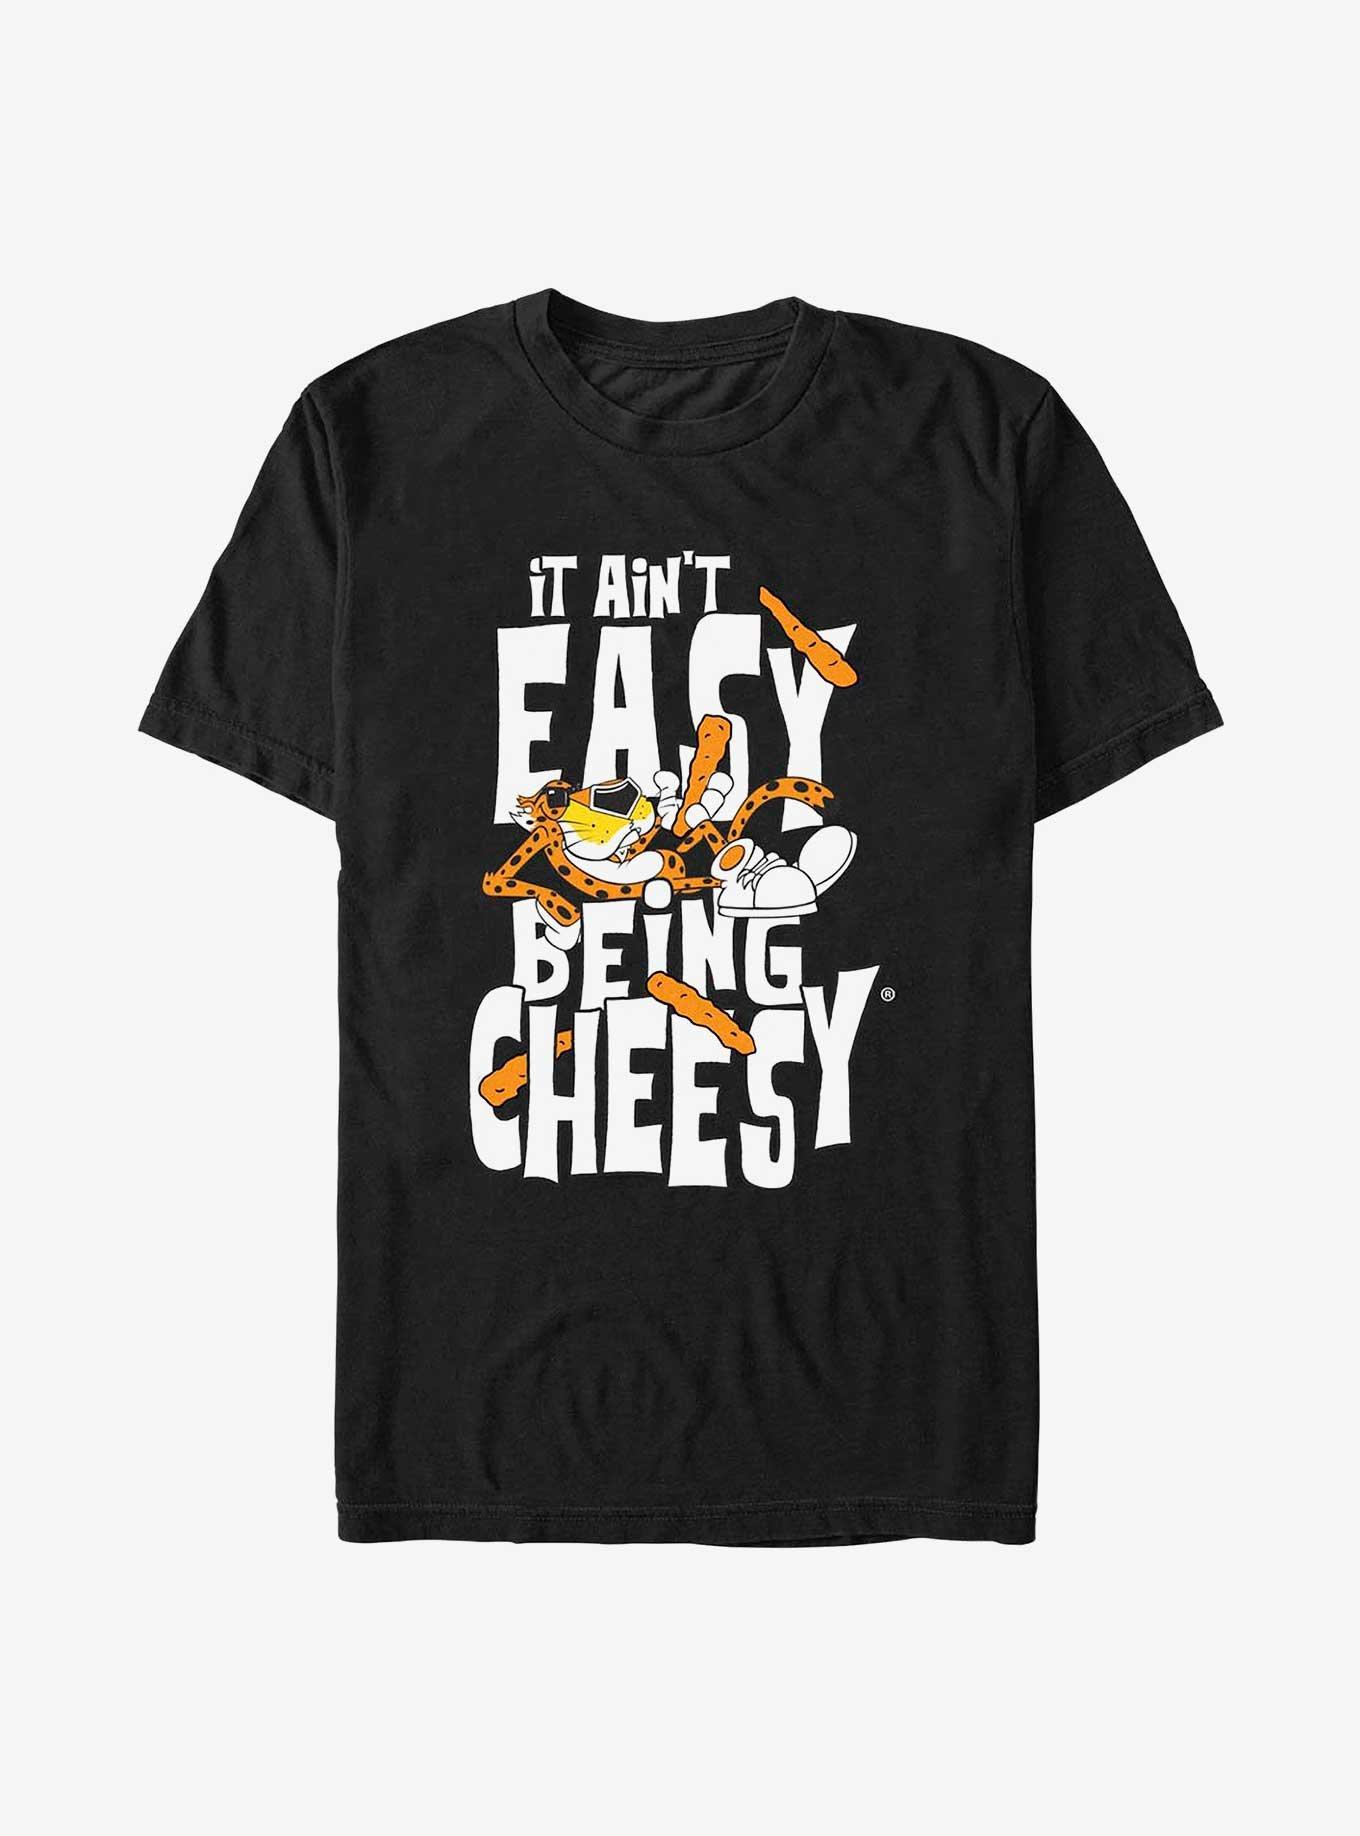 Cheetos It Ain't Easy Being Cheesy T-Shirt, BLACK, hi-res